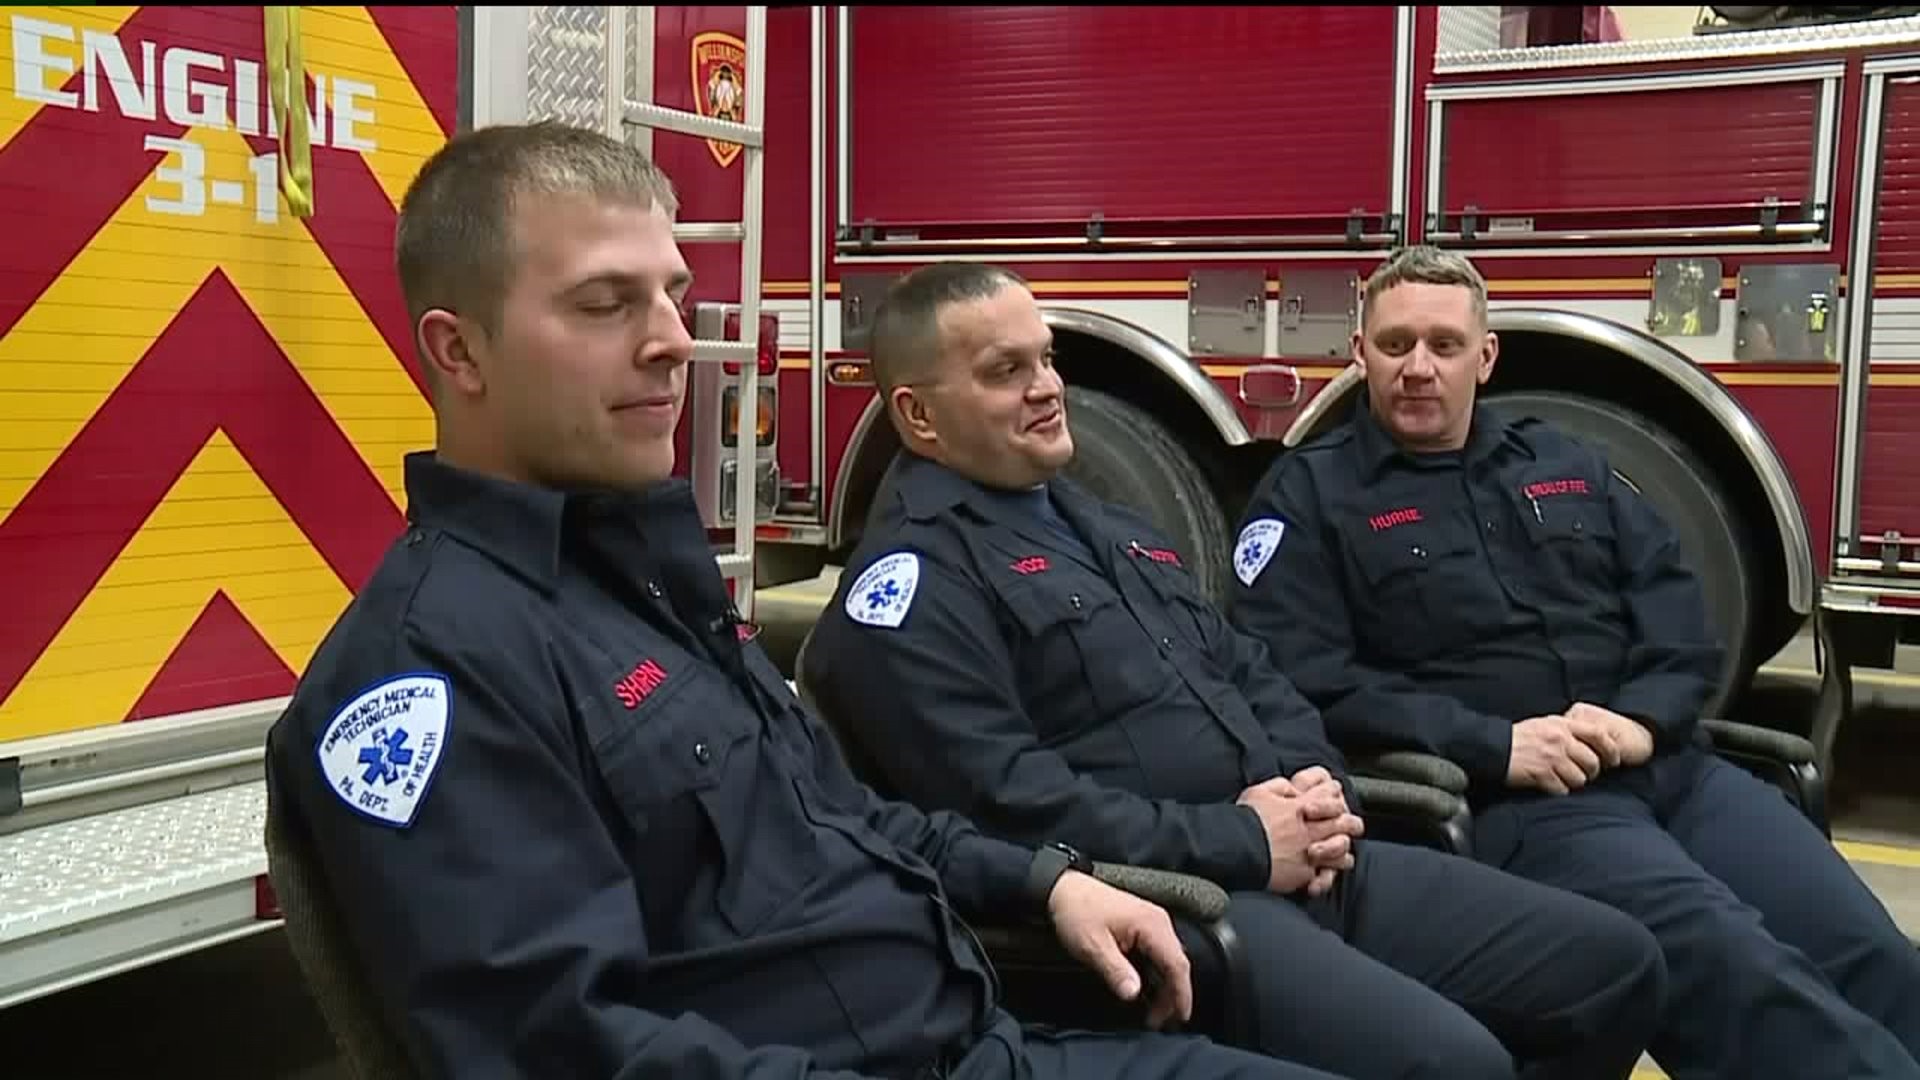 Firefighters Recall Life-threatening Experience